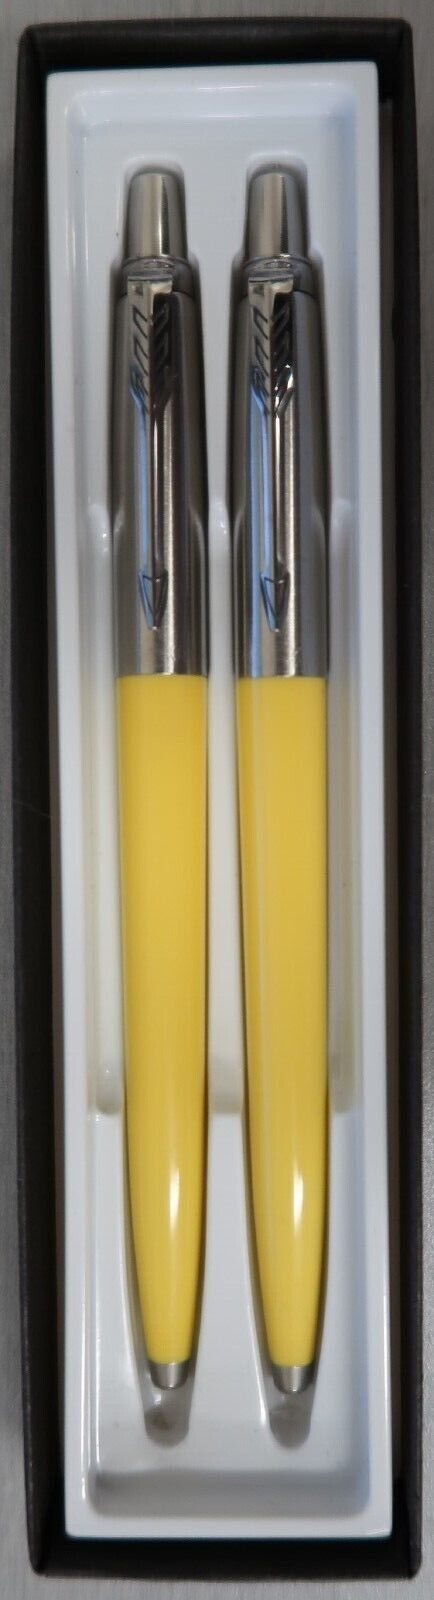 Parker Jotter 2 Ballpoint Pens Stainless Steel & Yellow Black Ink New In Box